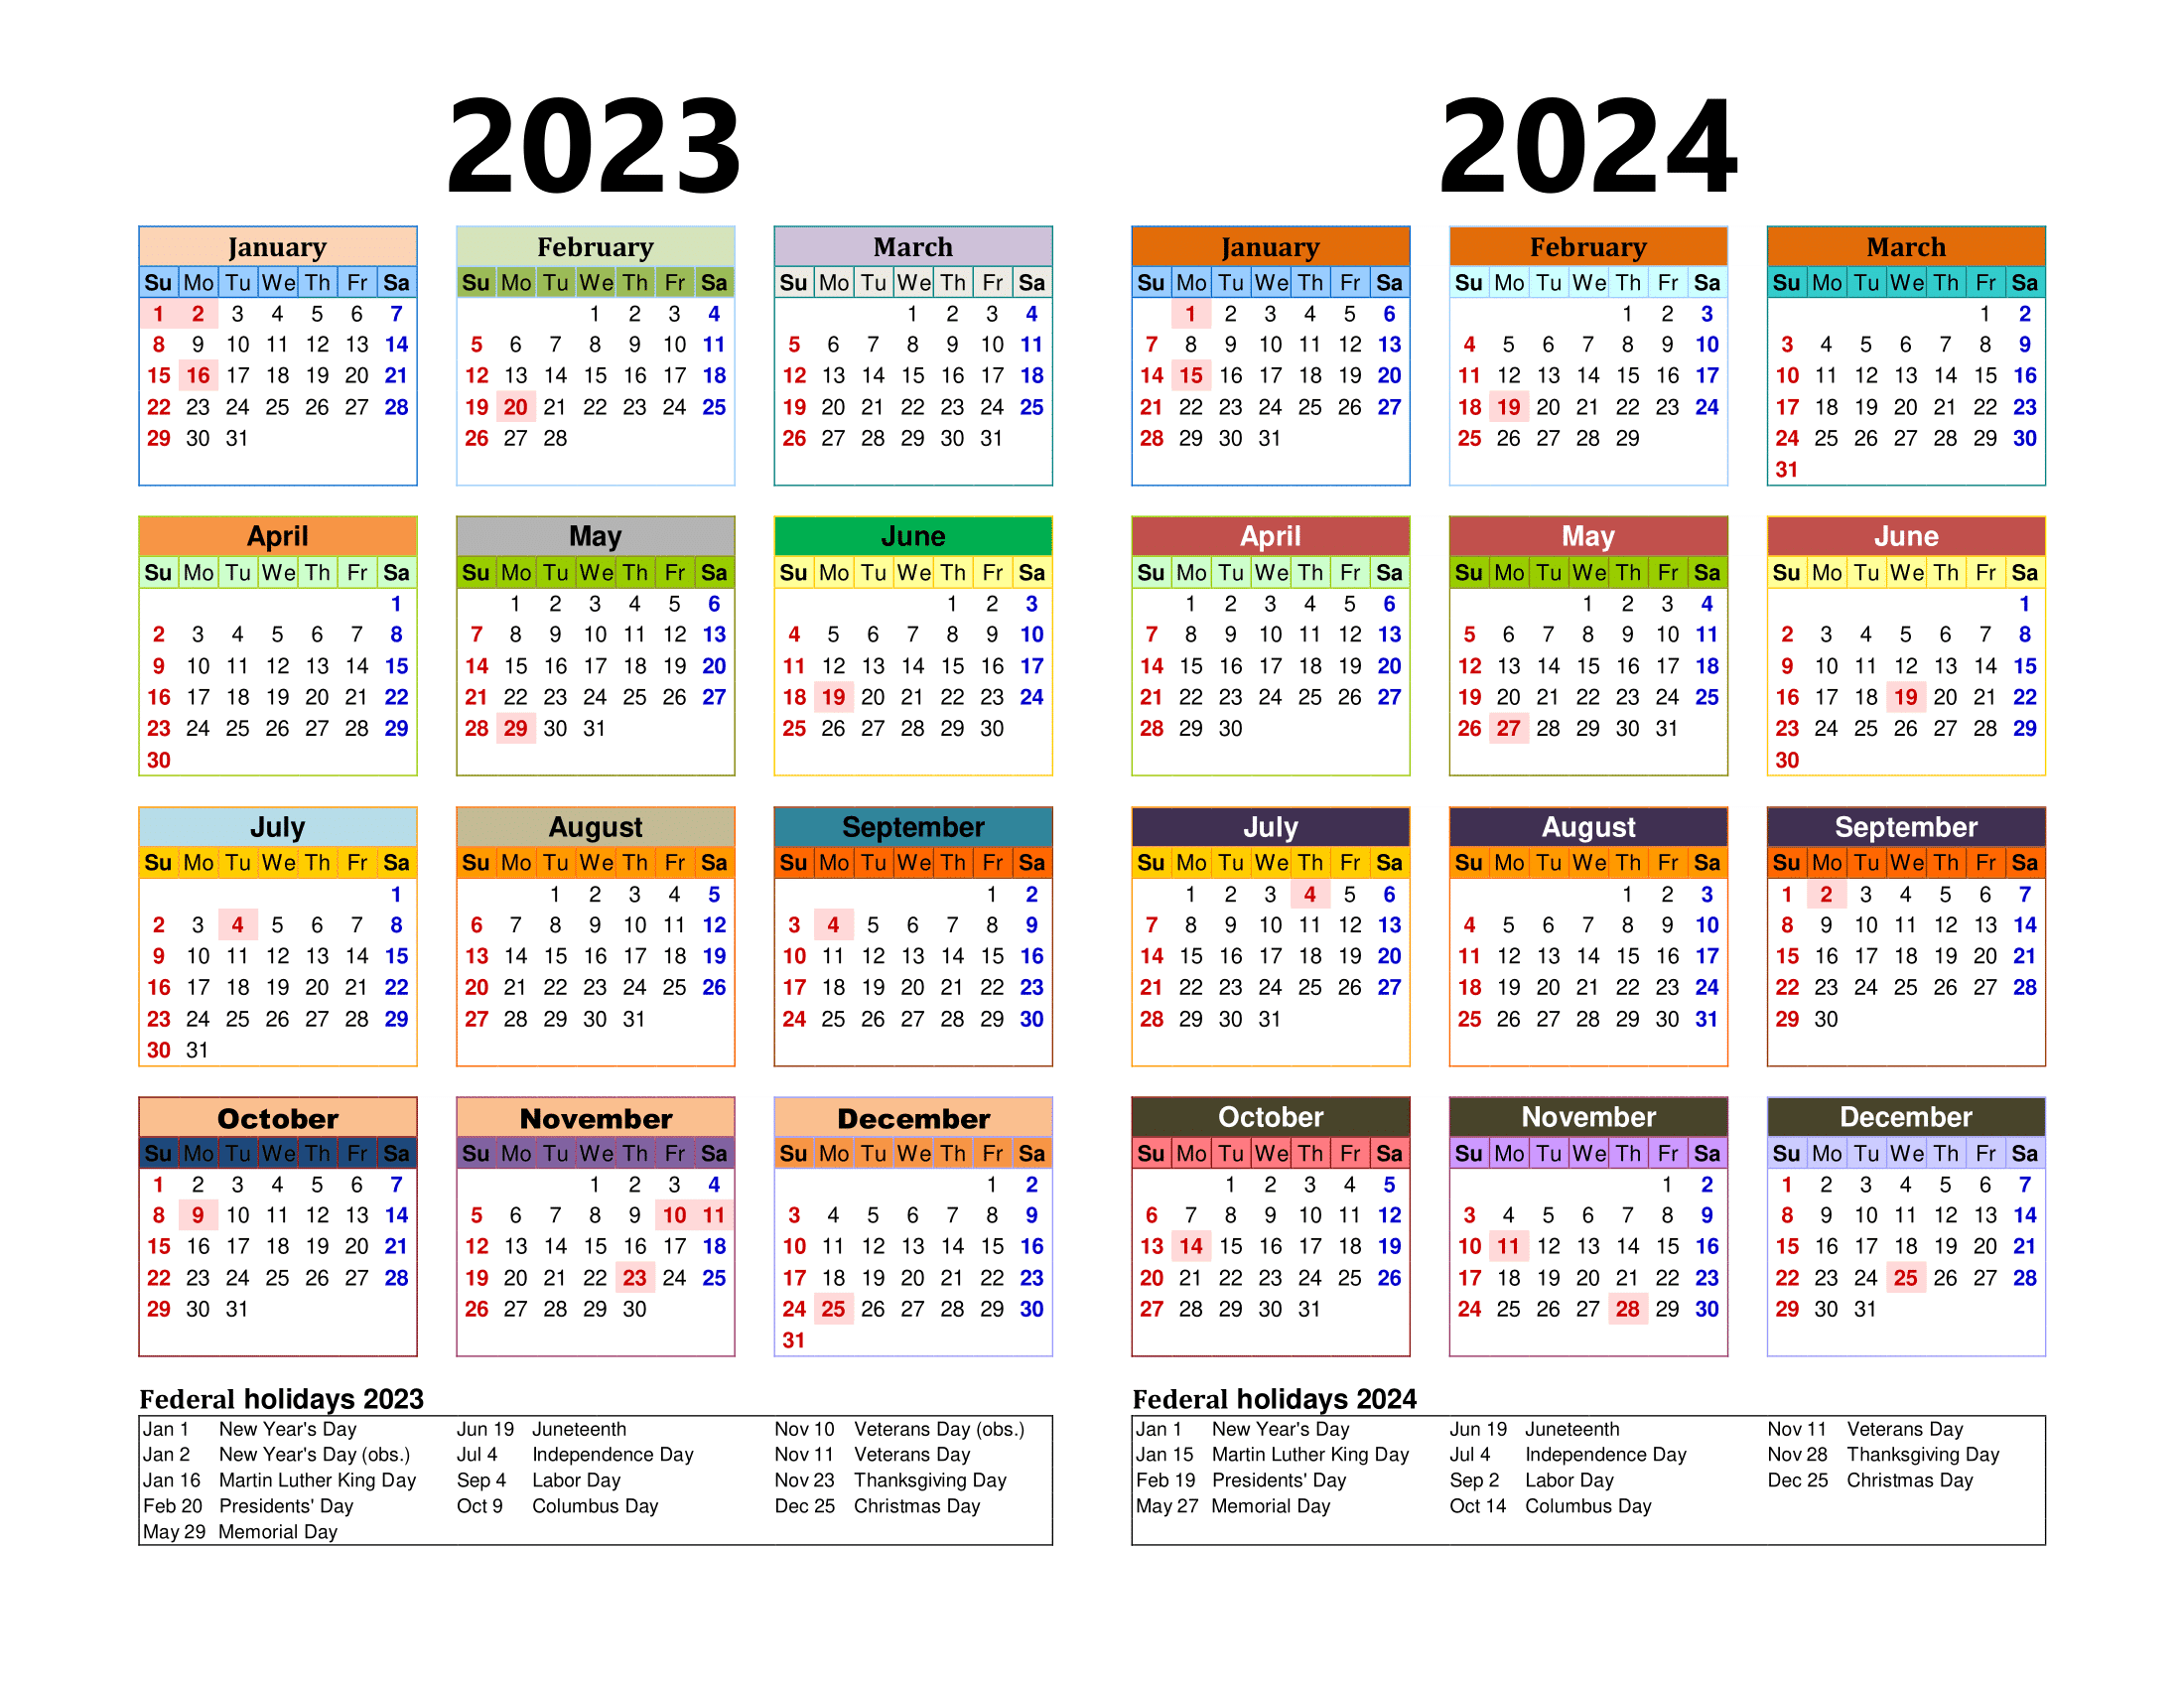 Free Printable Two Year Calendar Templates For 2023 And 2024 In Pdf for Free Printable Calendar 2023-2024